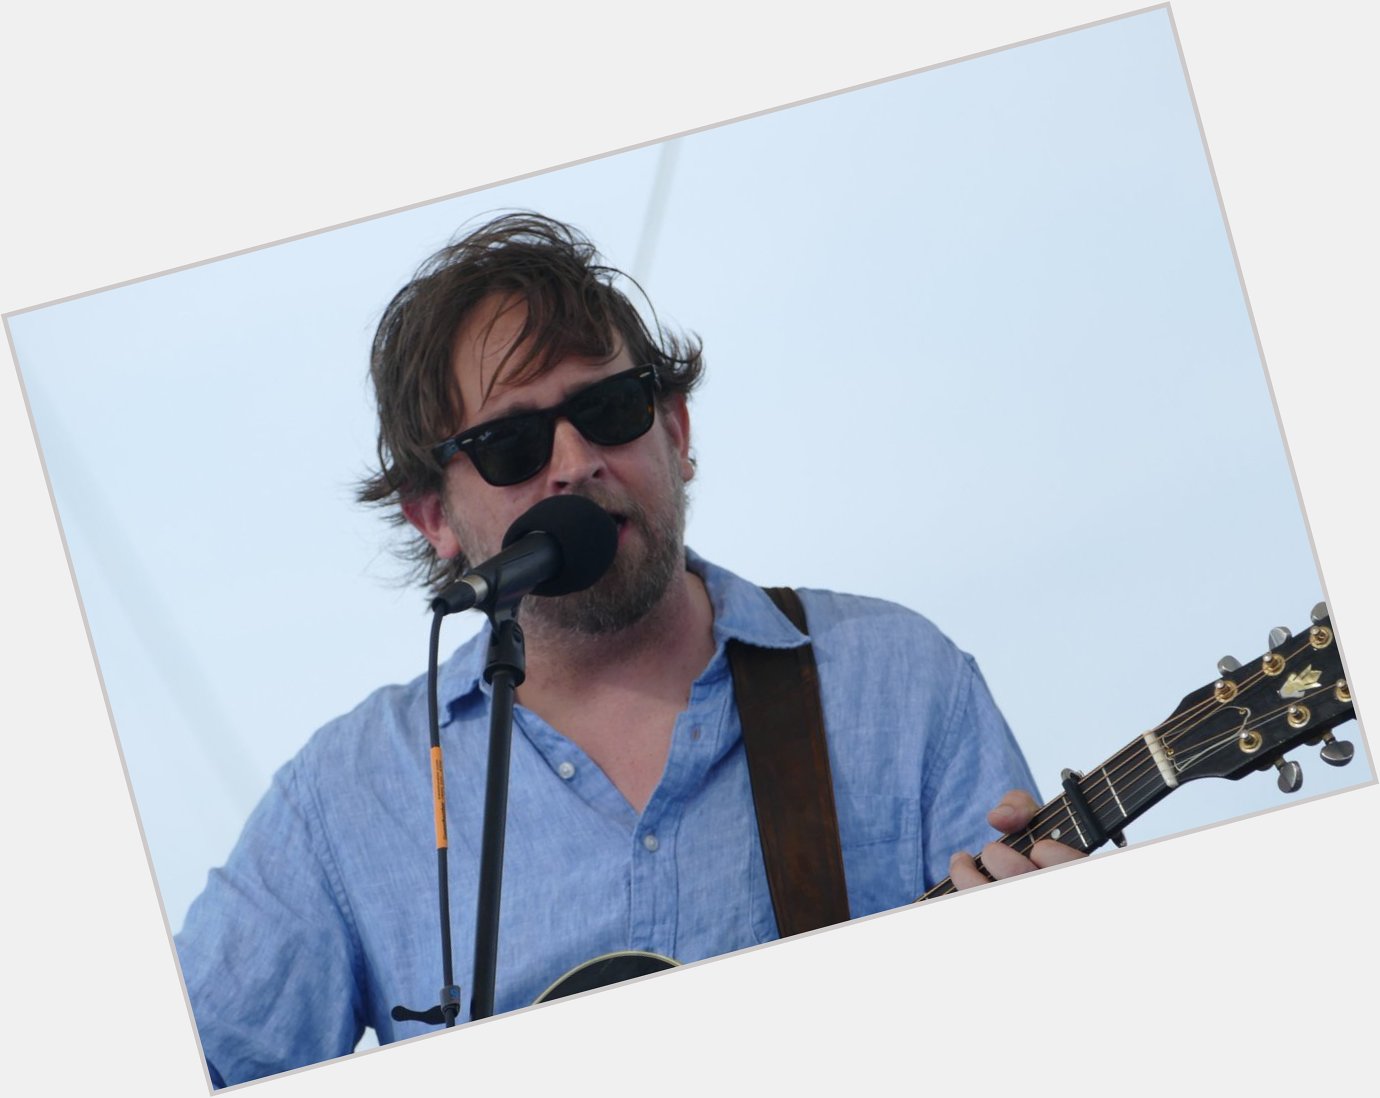 Happy Birthday Hayes Carll!
What are your favorite songs / lyrics? 